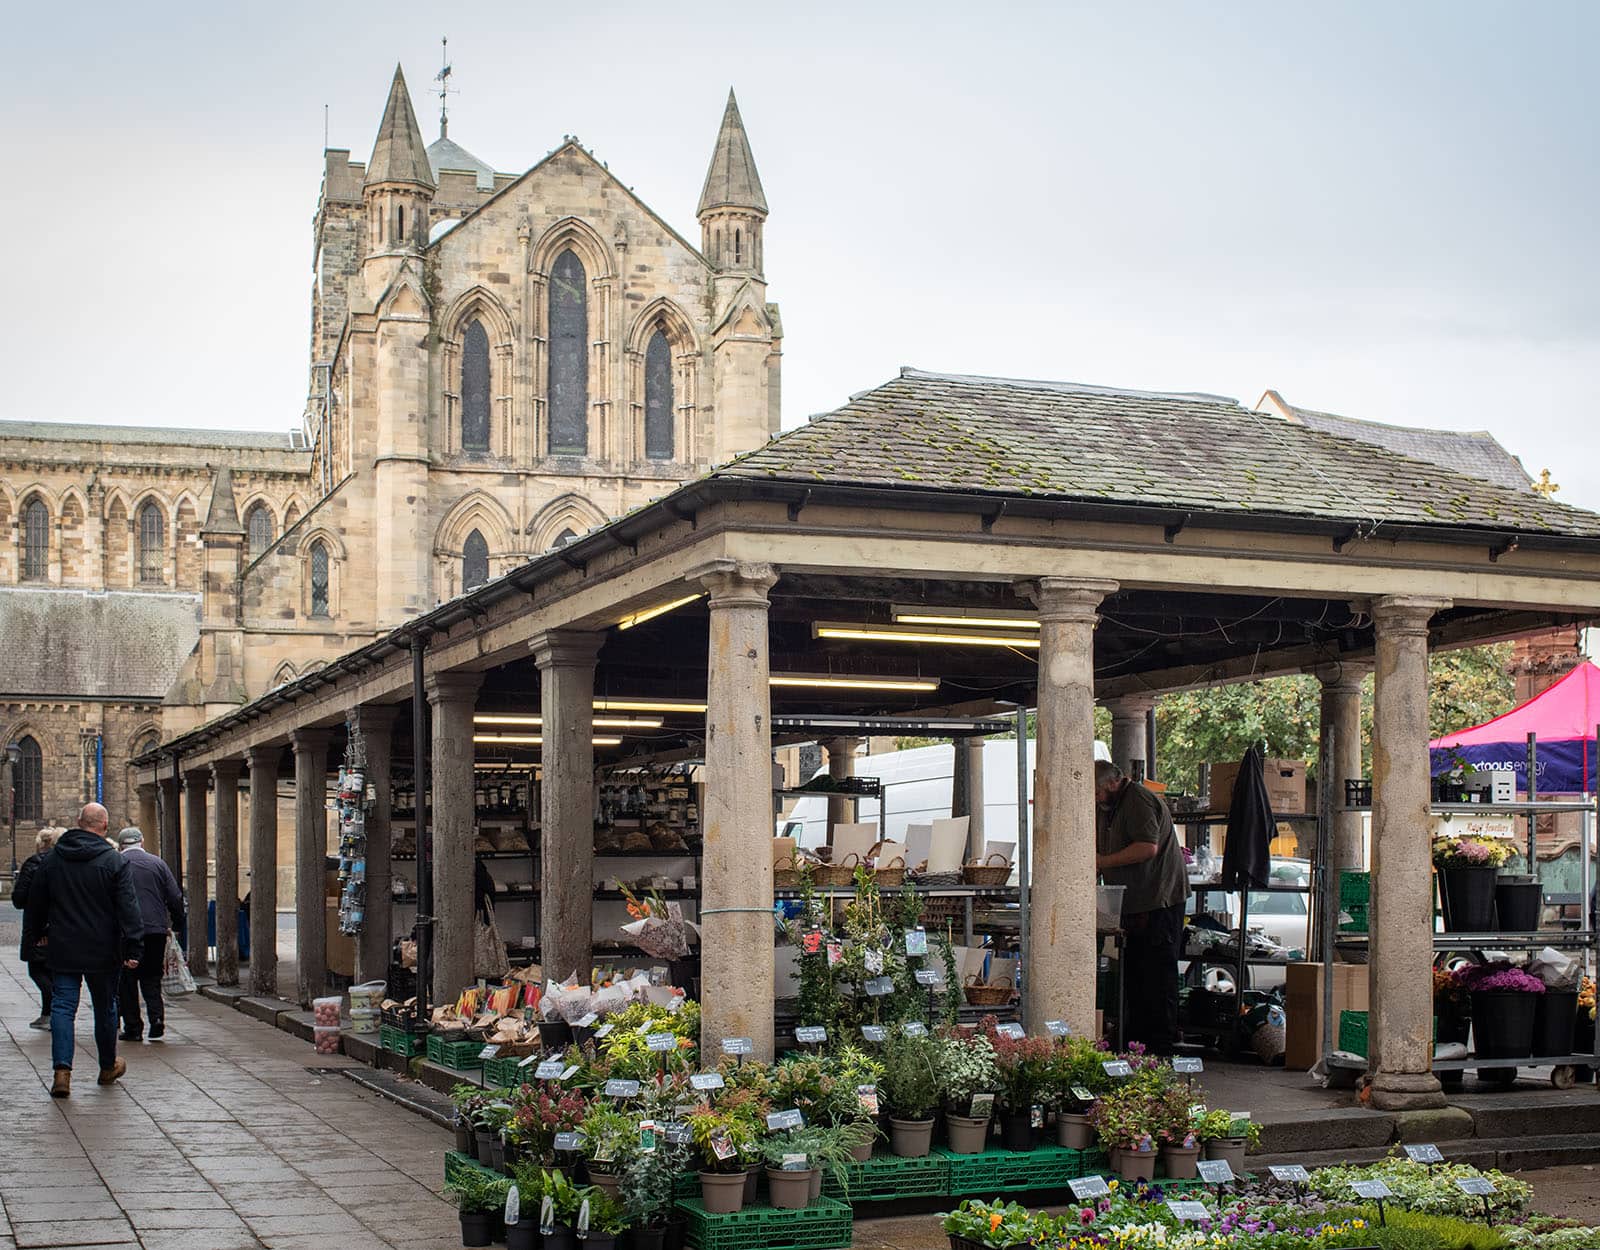 Hexham market day pic with Abbey in background